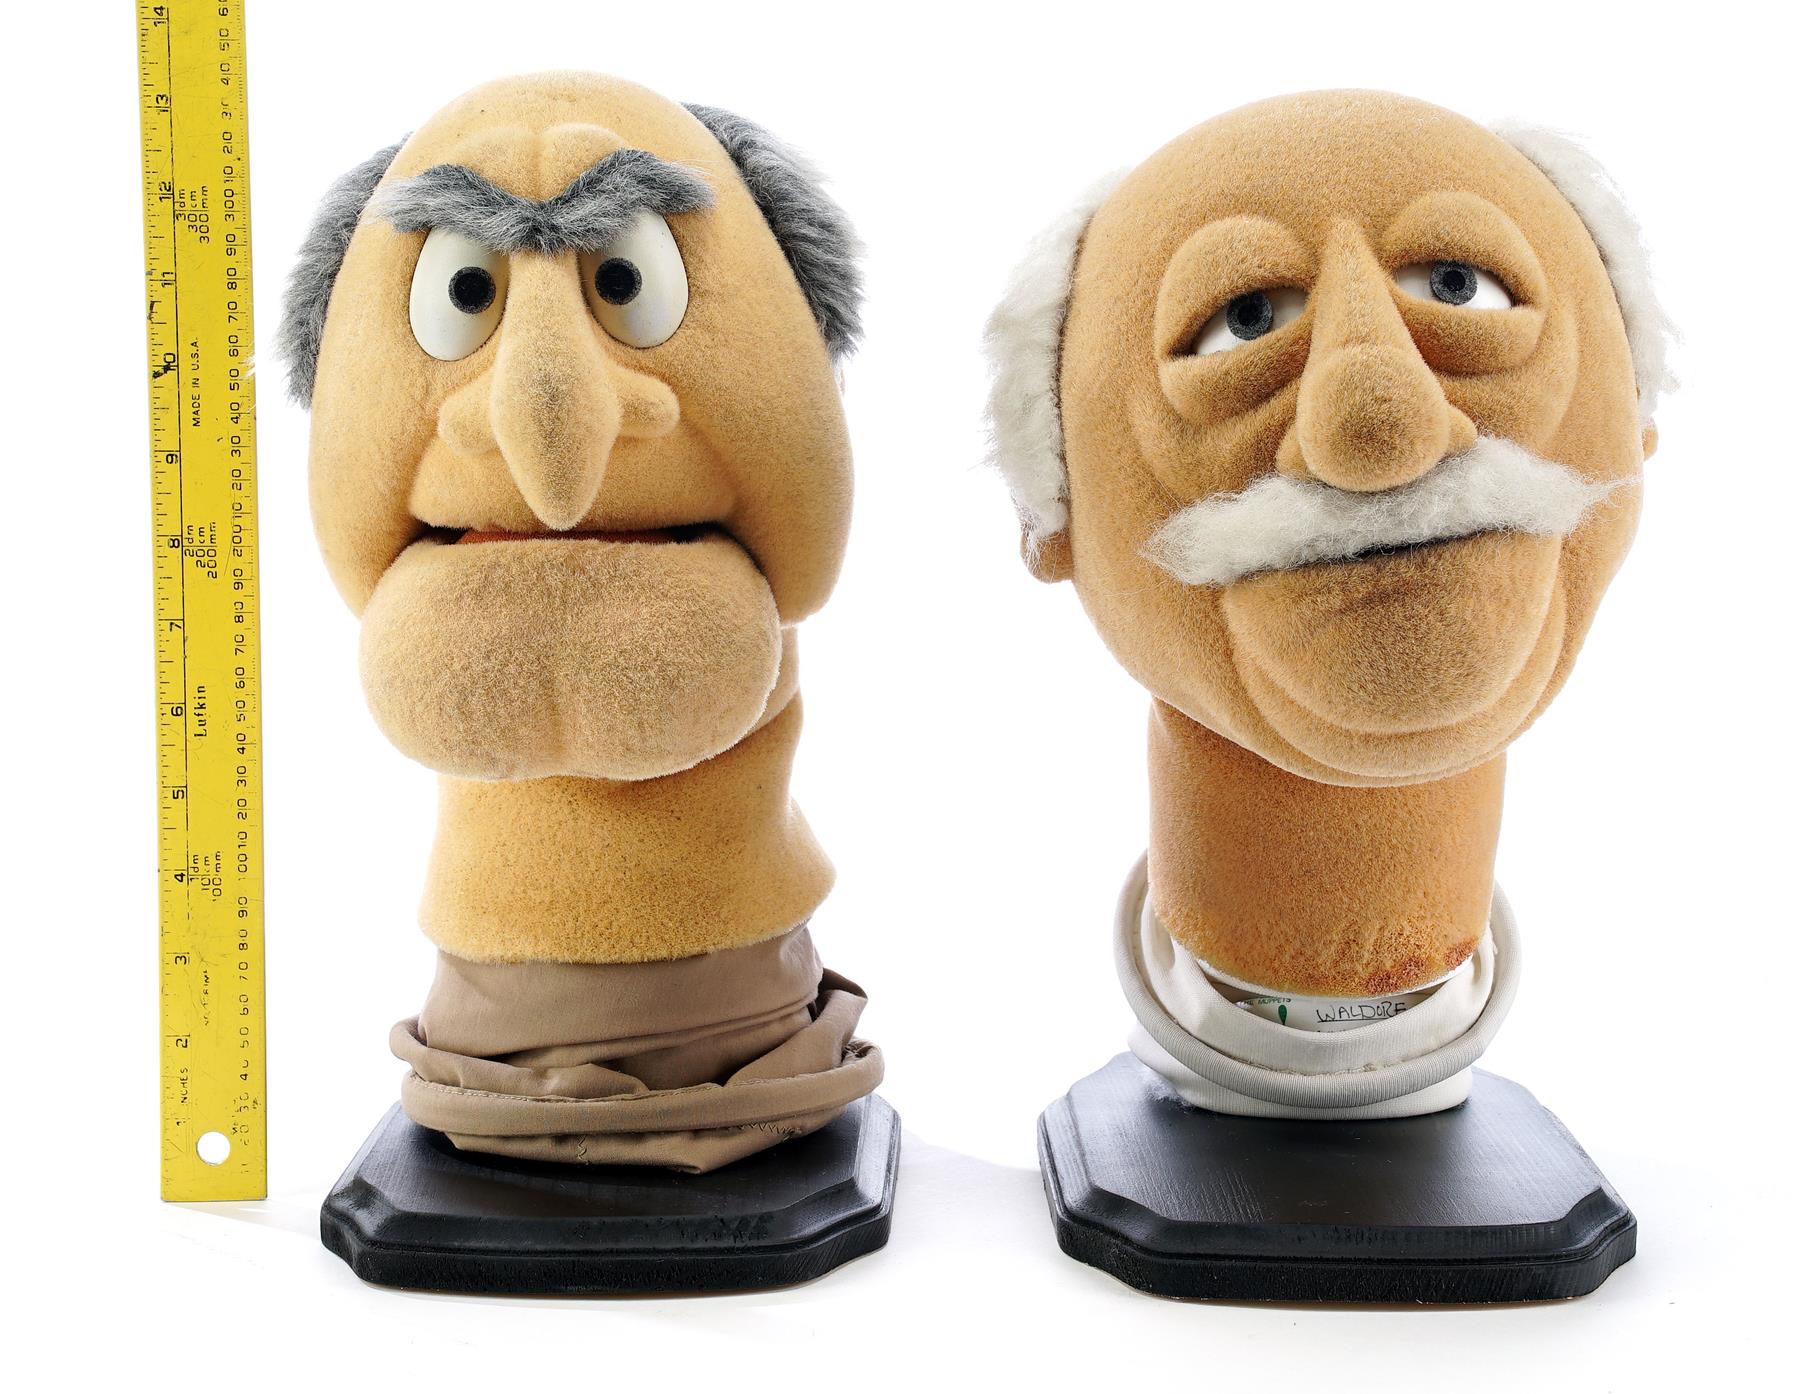 Statler and Waldorf muppets, Prop Store auction